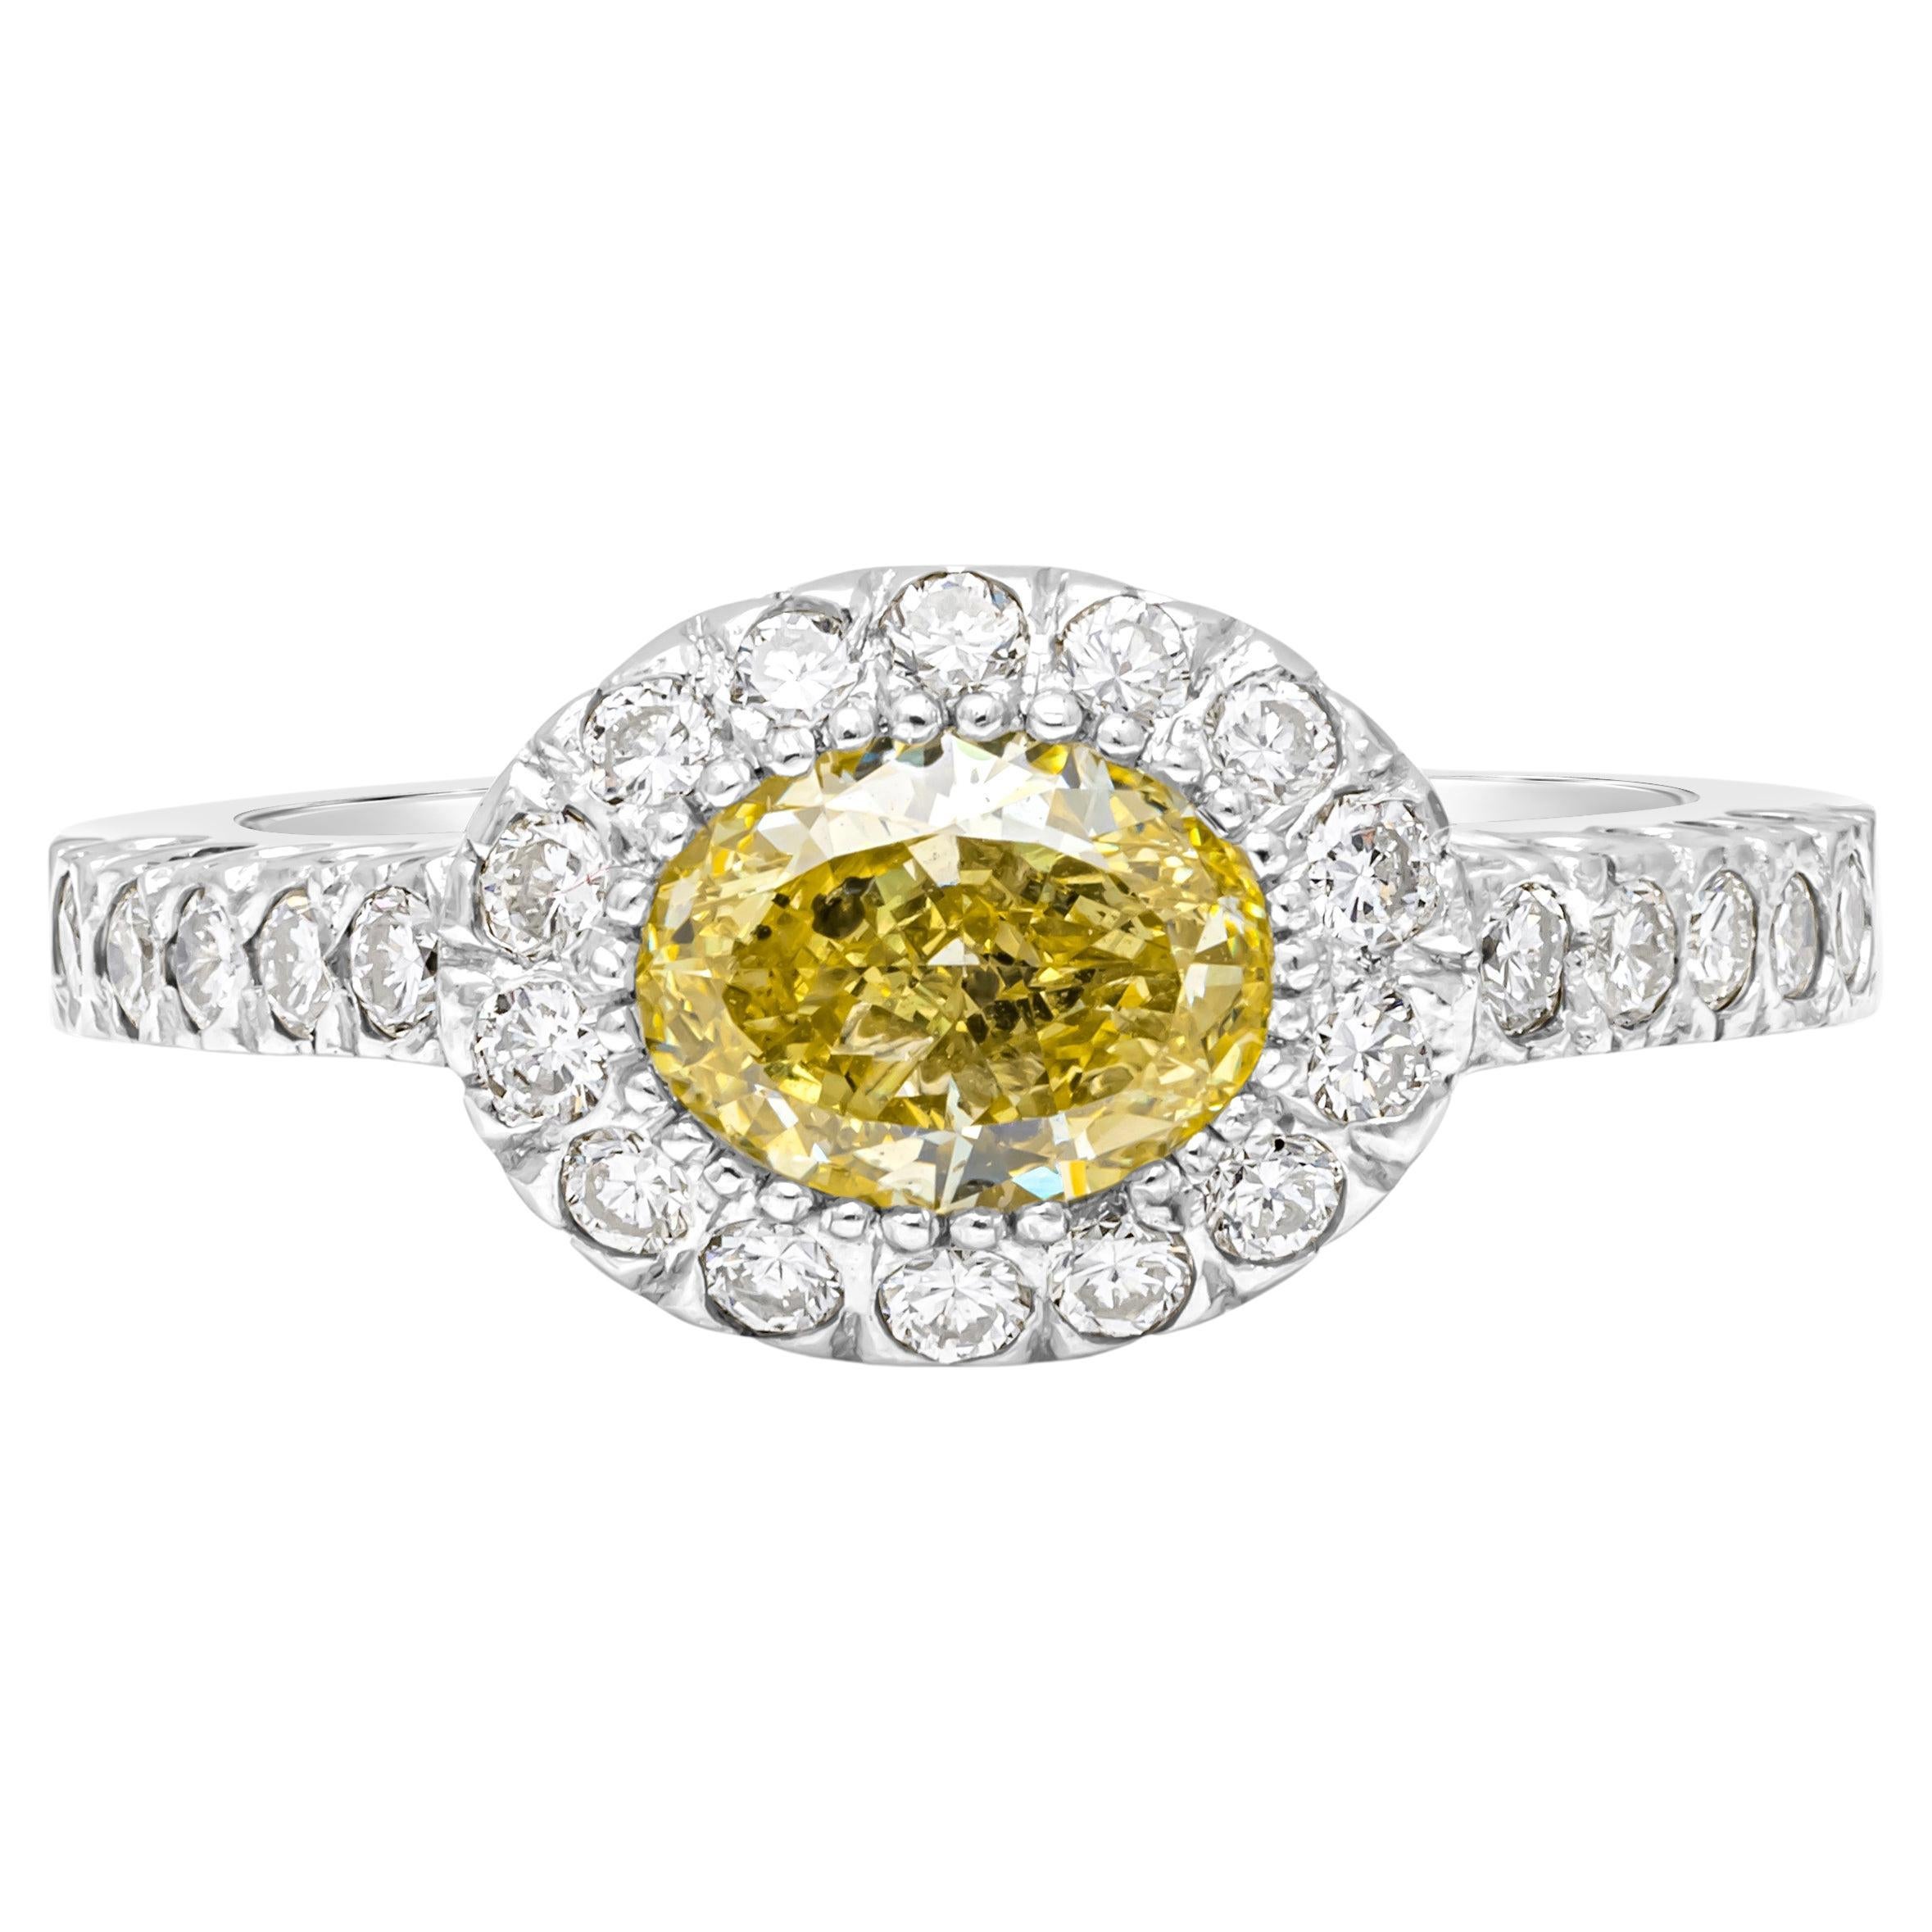 GIA Certified 1.03 Carats Oval Cut Fancy Yellow Diamond Halo Engagement Ring For Sale